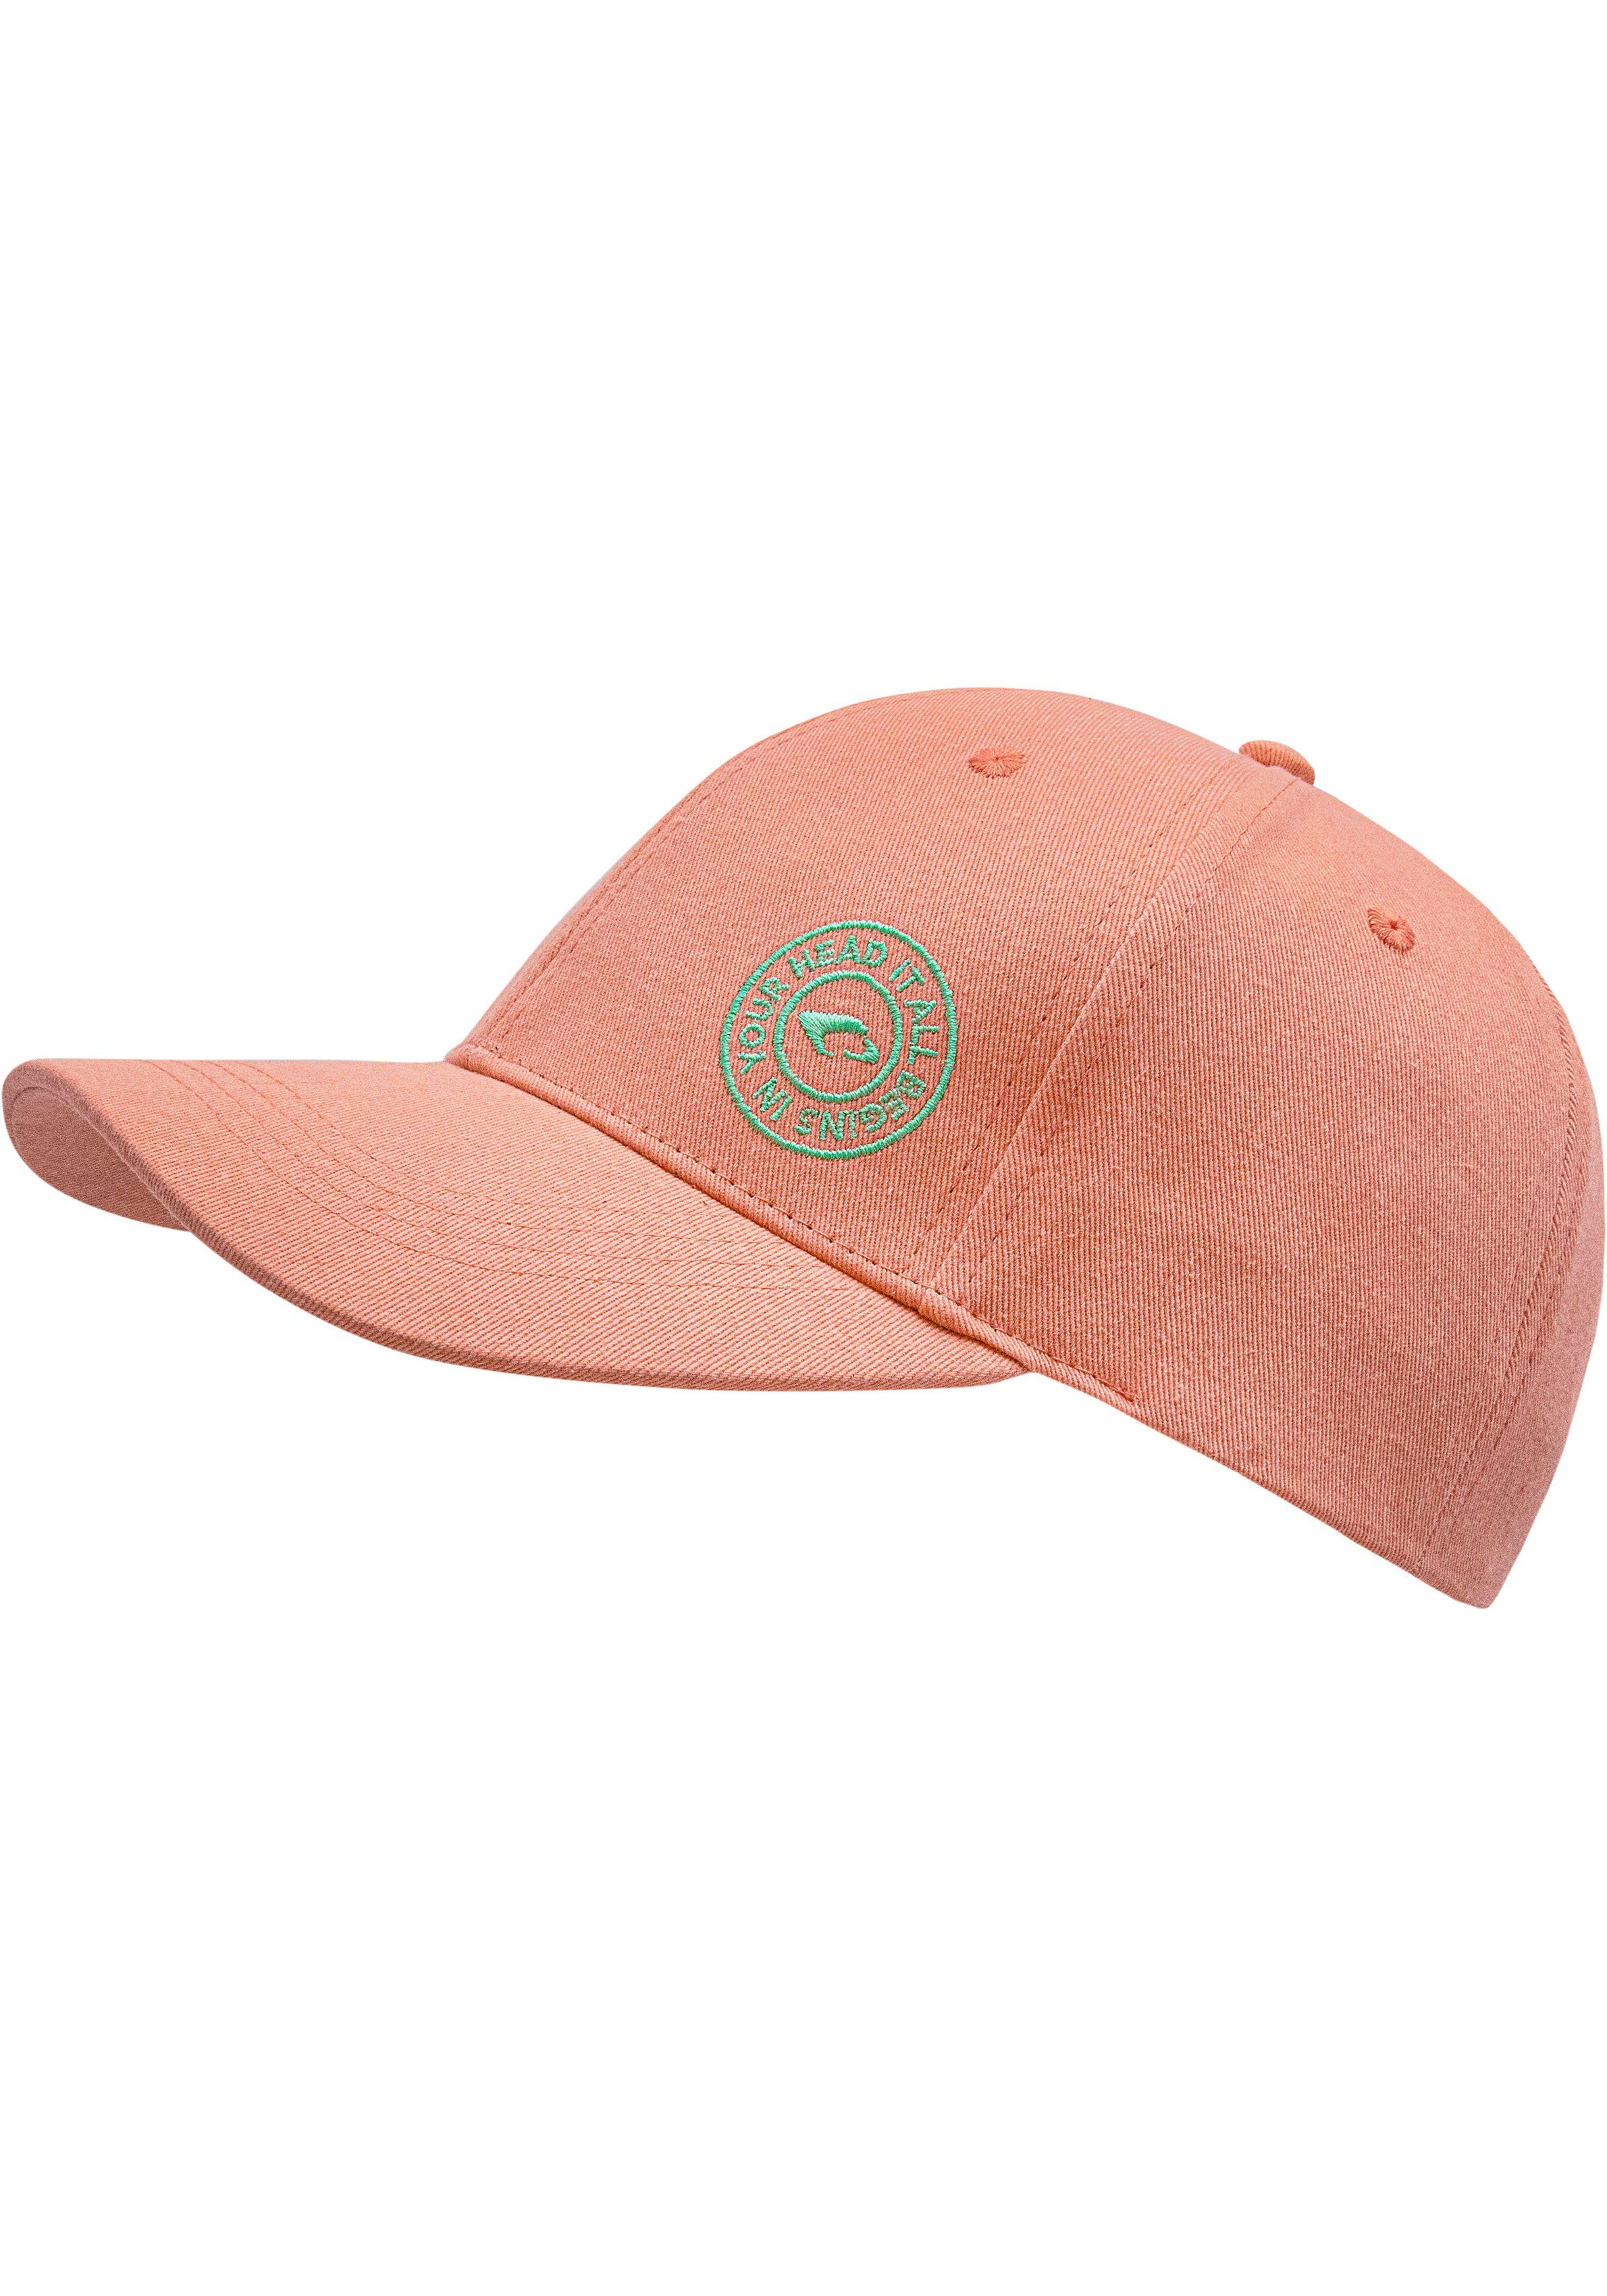 chillouts Baseball Cap Arklow Hat coral